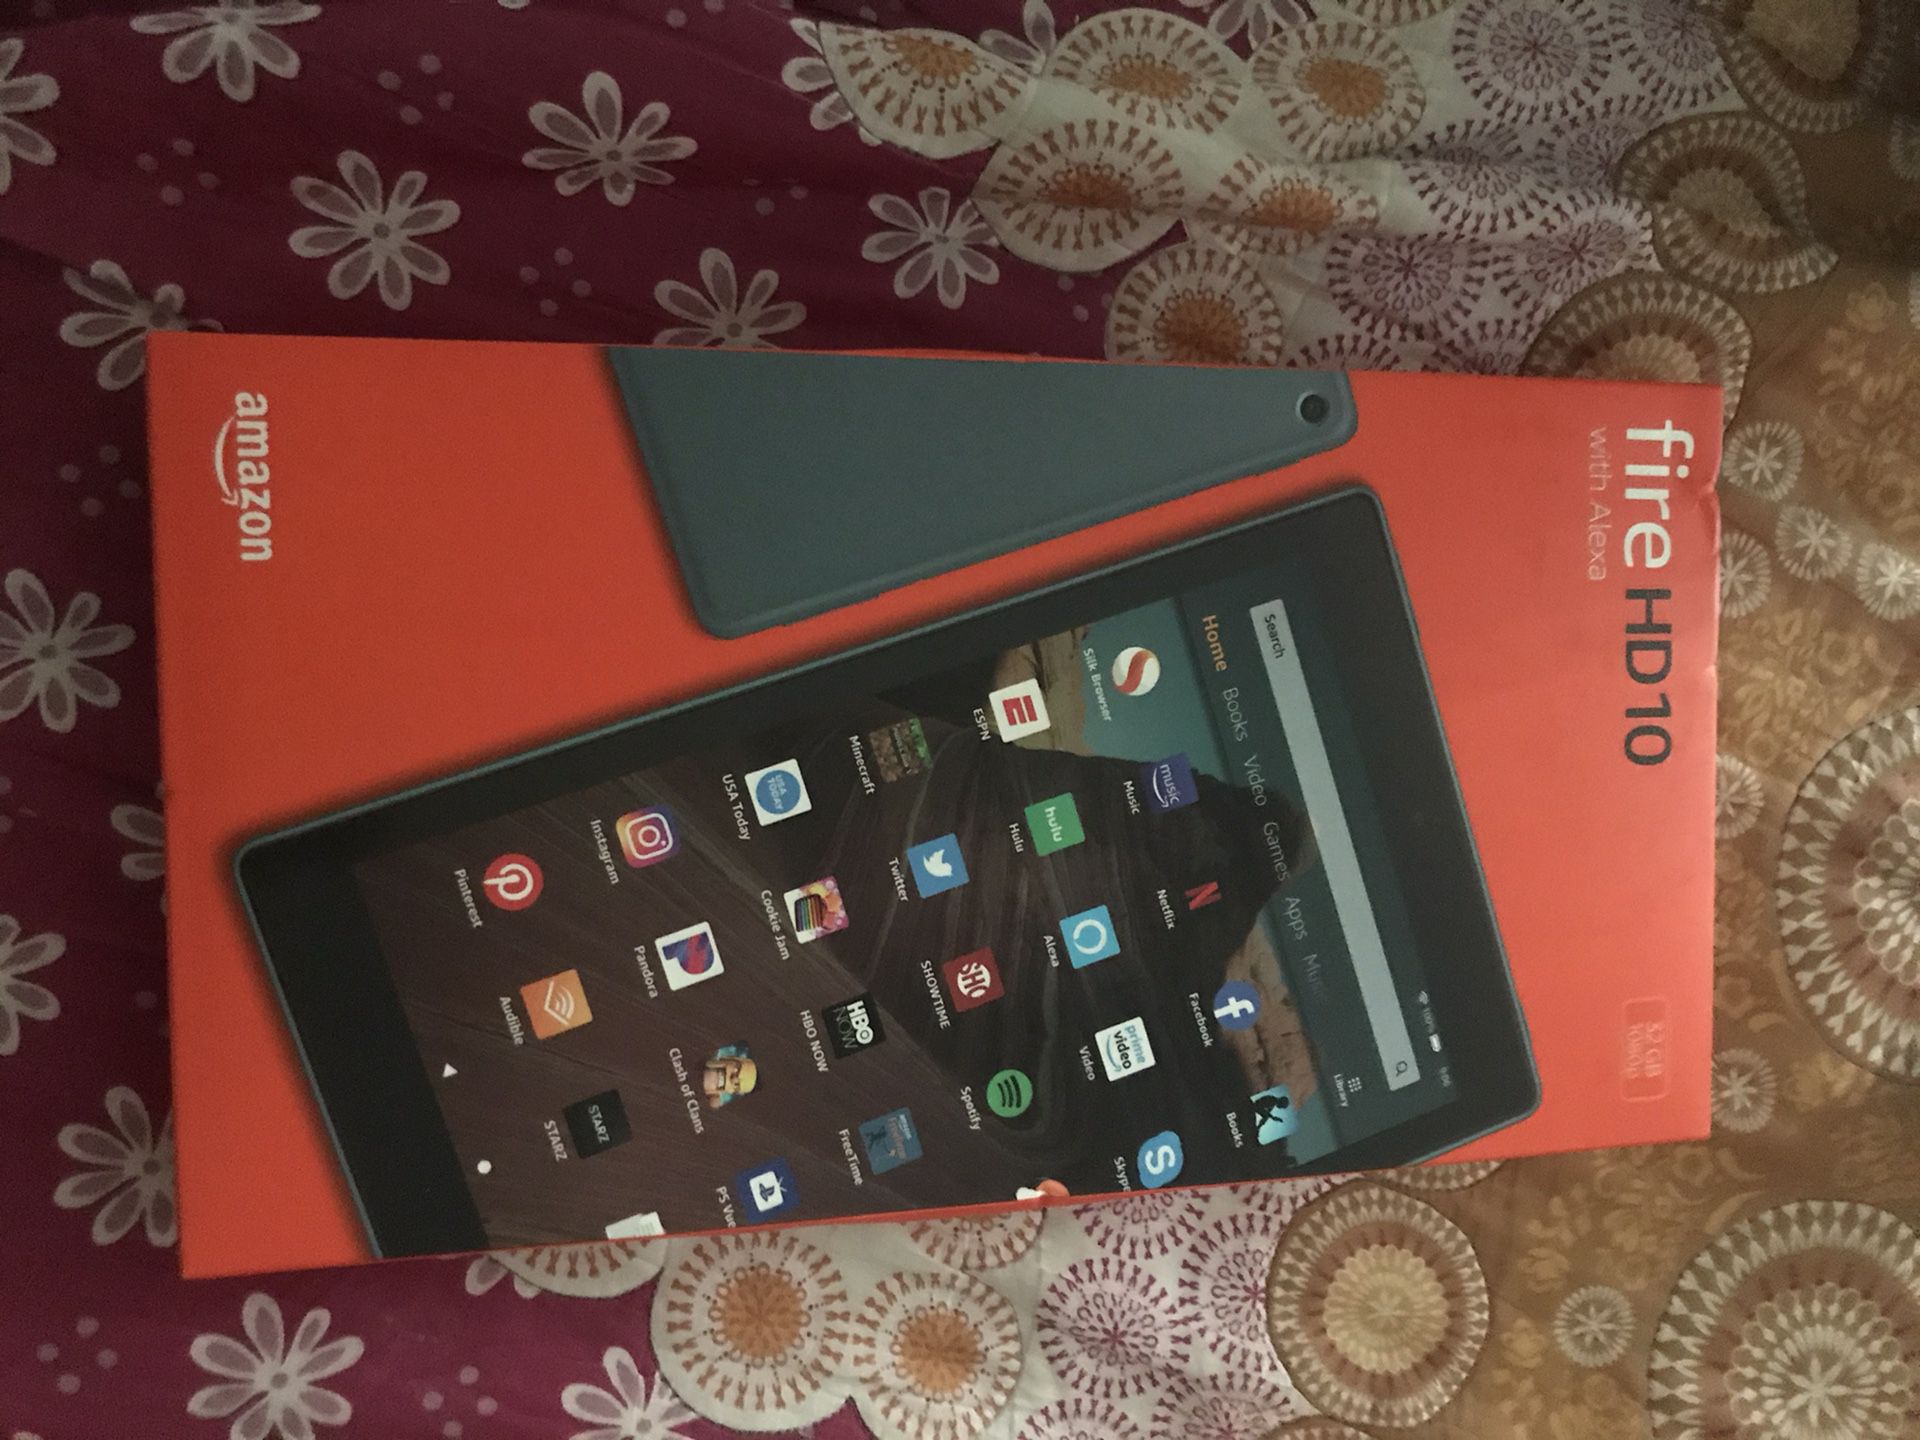 A fire HD 10 tablet brand new never used